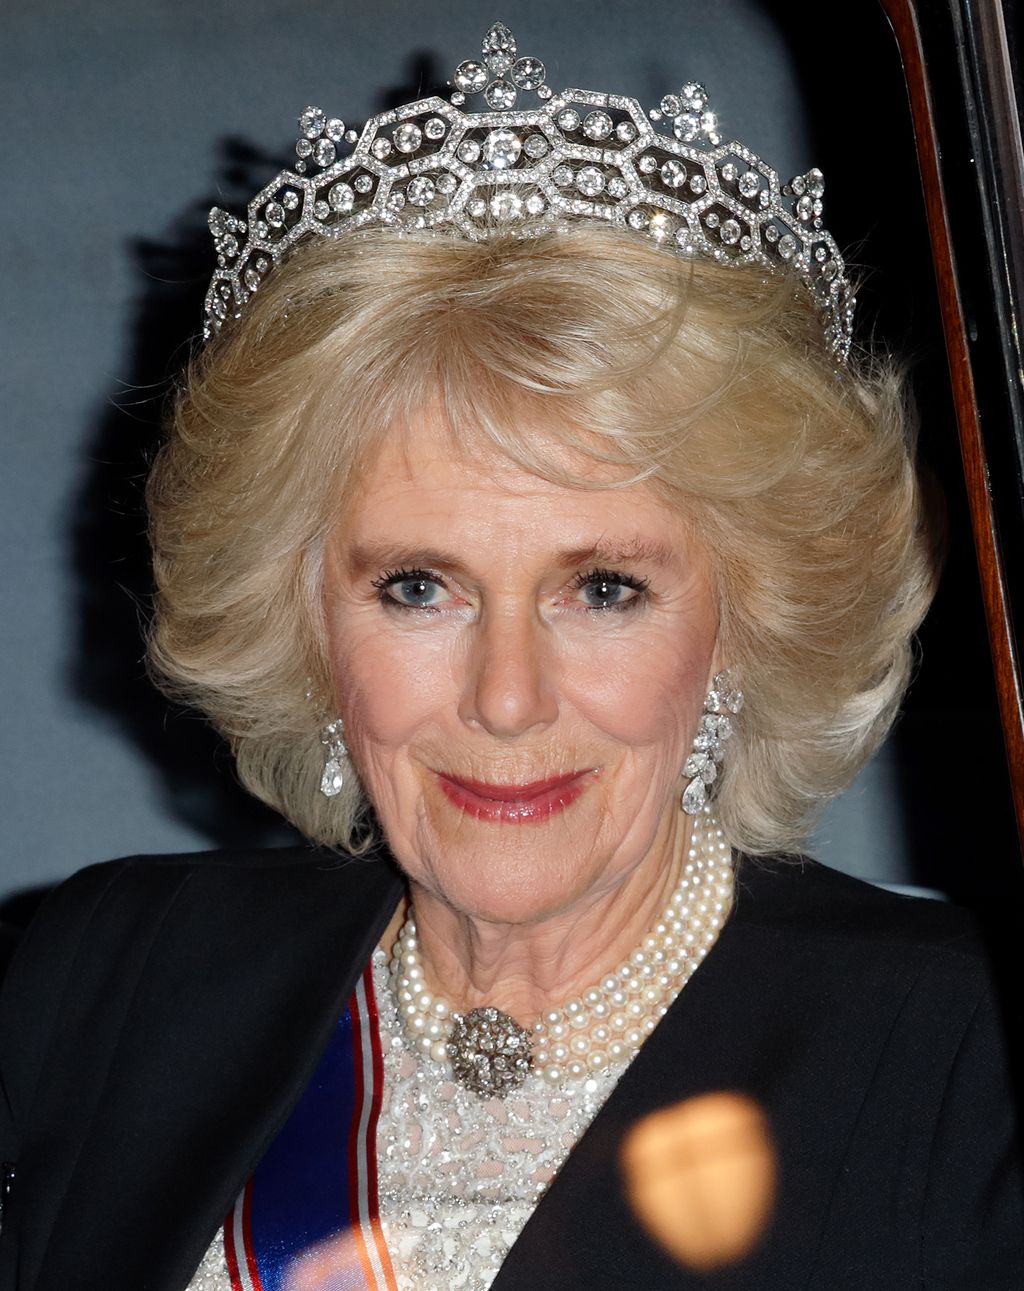 LONDON, UNITED KINGDOM - DECEMBER 05: (EMBARGOED FOR PUBLICATION IN UK NEWSPAPERS UNTIL 24 HOURS AFTER CREATE DATE AND TIME) Camilla, Duchess of Cornwall attends the annual Diplomatic Reception at Buckingham Palace on December 5, 2017 in London, England. (Photo by Max Mumby/Indigo/Getty Images)